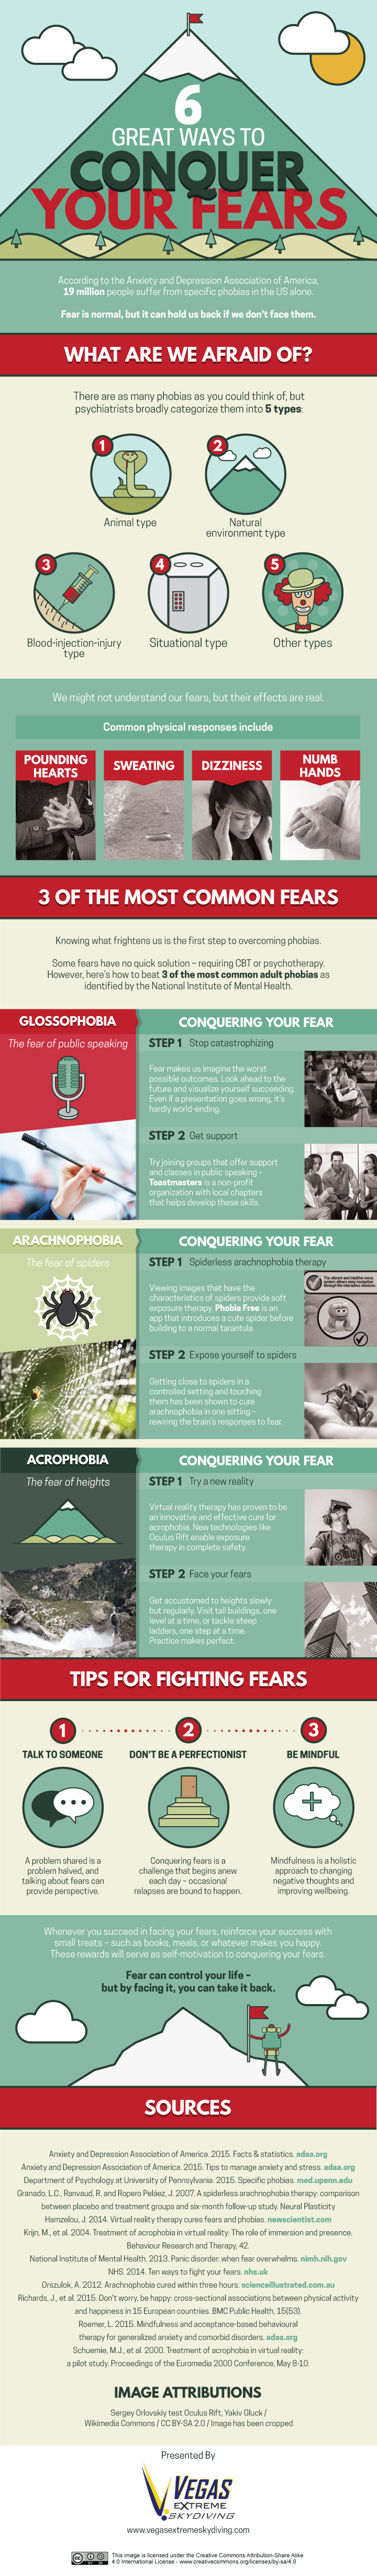 6-great-ways-to-conquer-your-fears.jpg